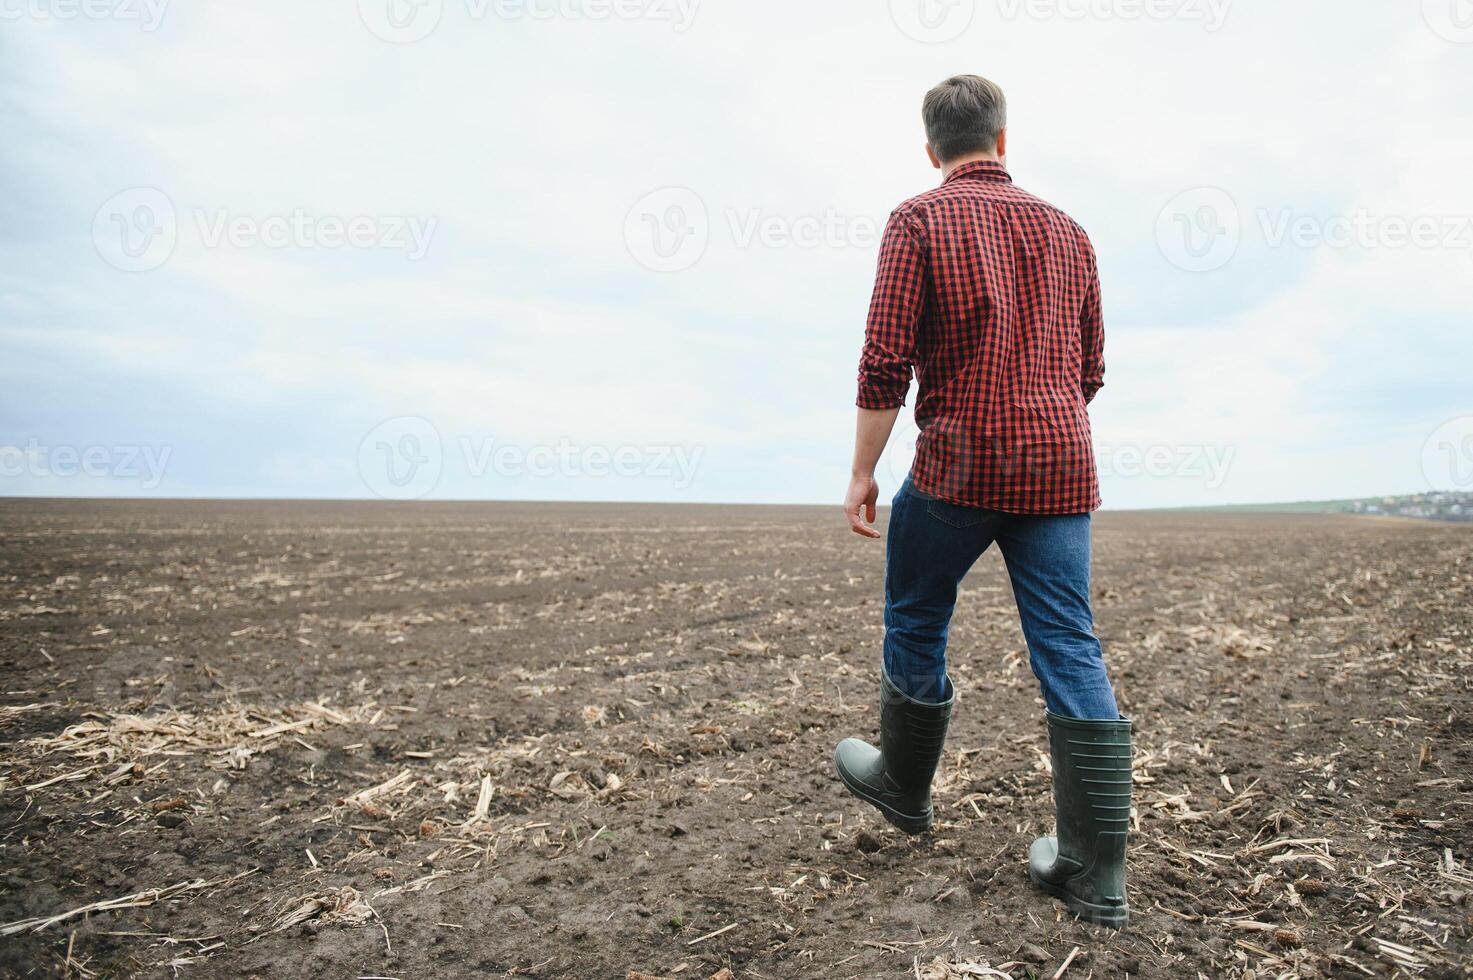 A farmer in boots works with his tablet in a field sown in spring. An agronomist walks the earth, assessing a plowed field in autumn. Agriculture. Smart farming technologies photo